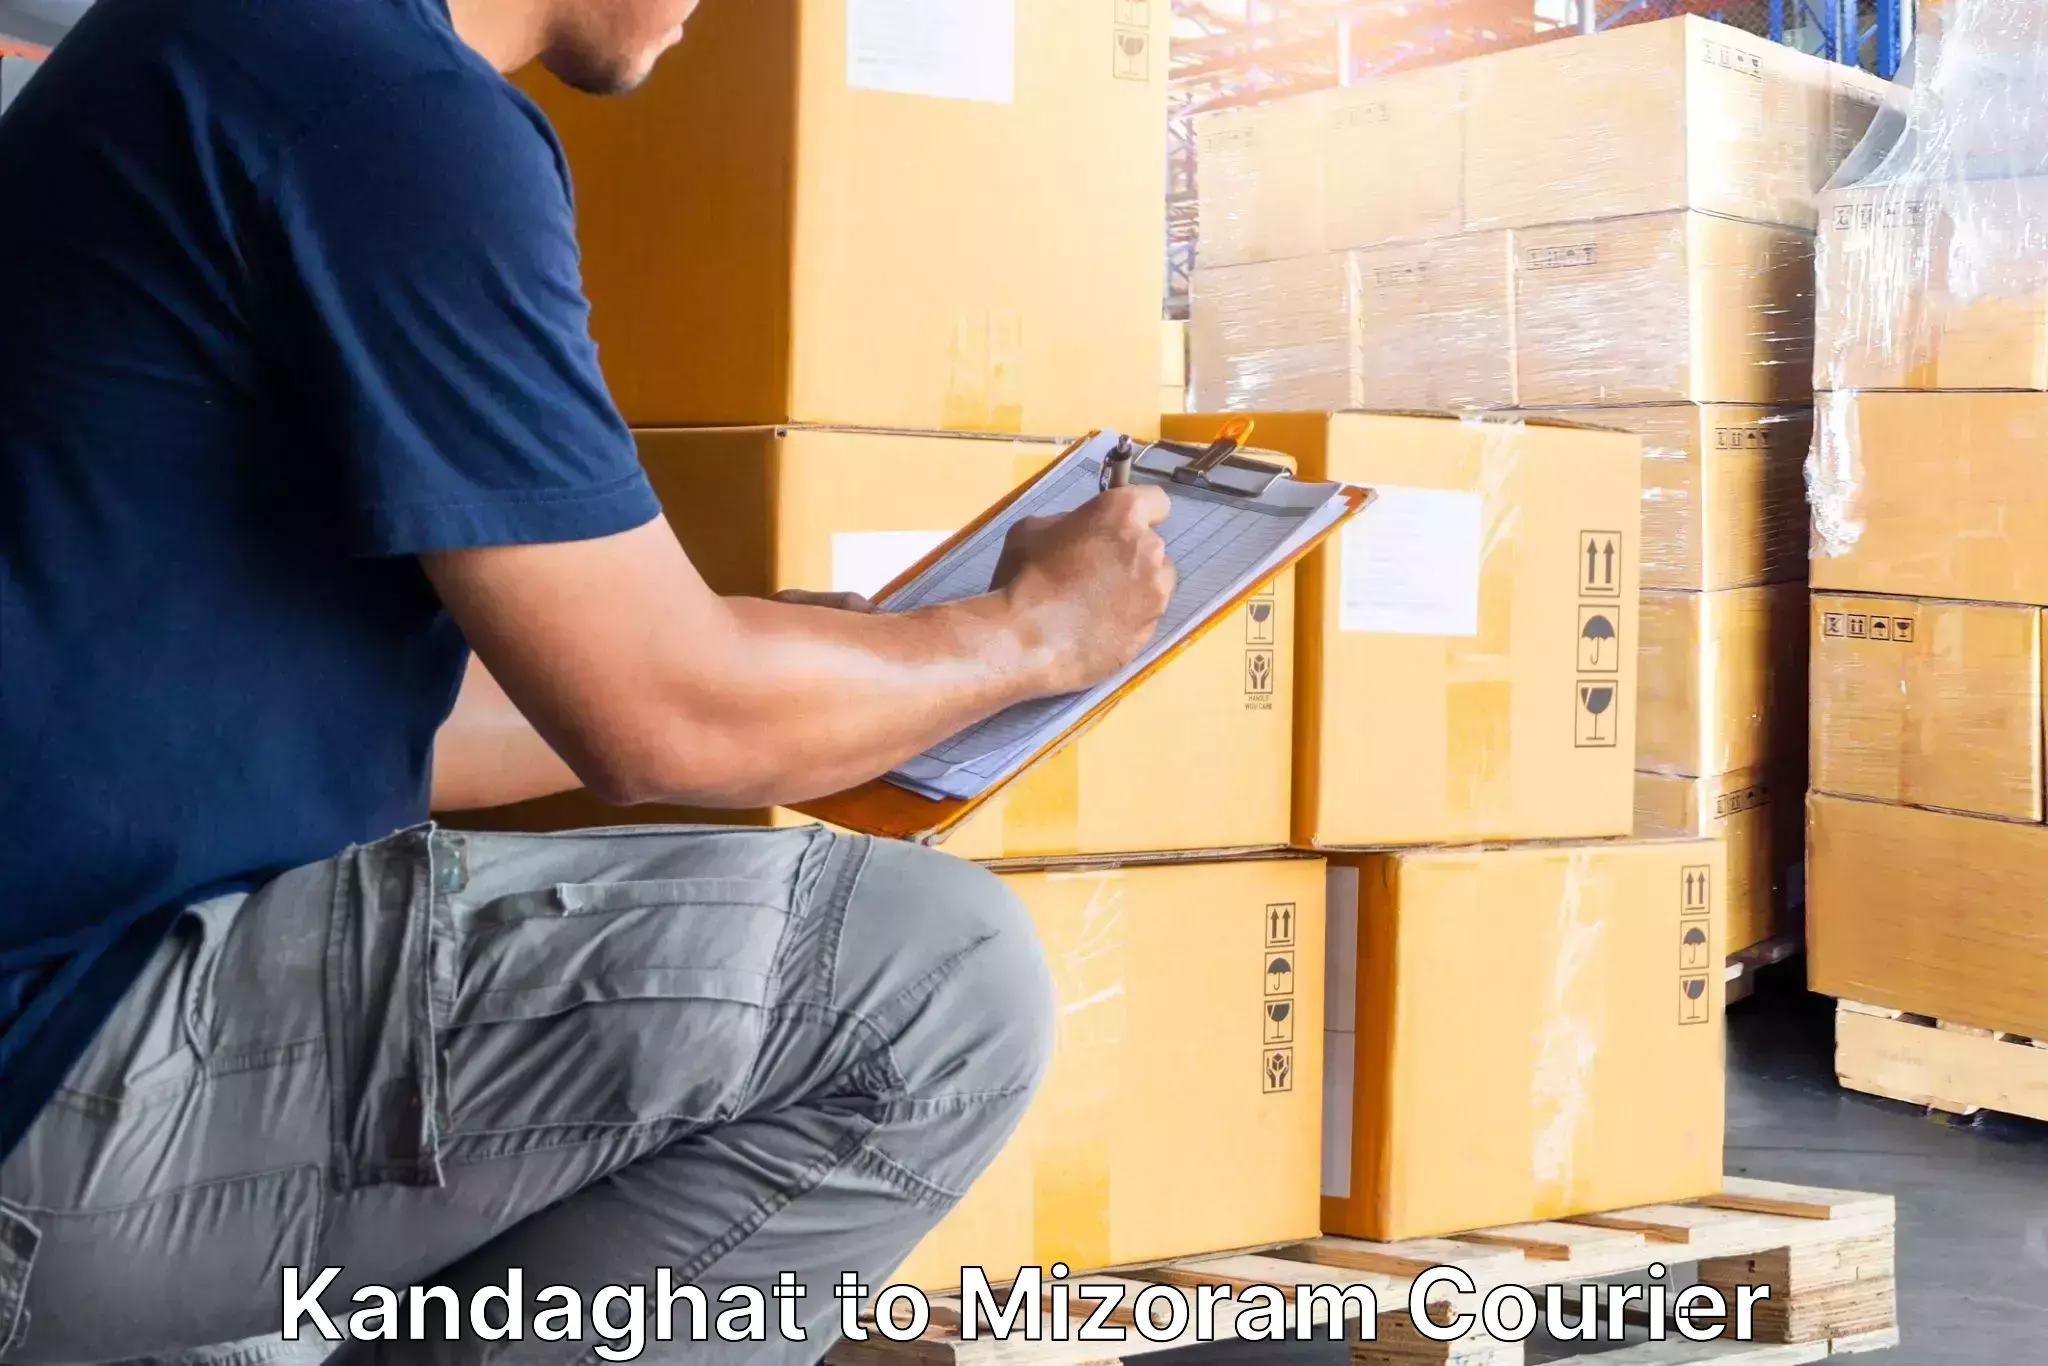 Trusted moving company Kandaghat to Darlawn